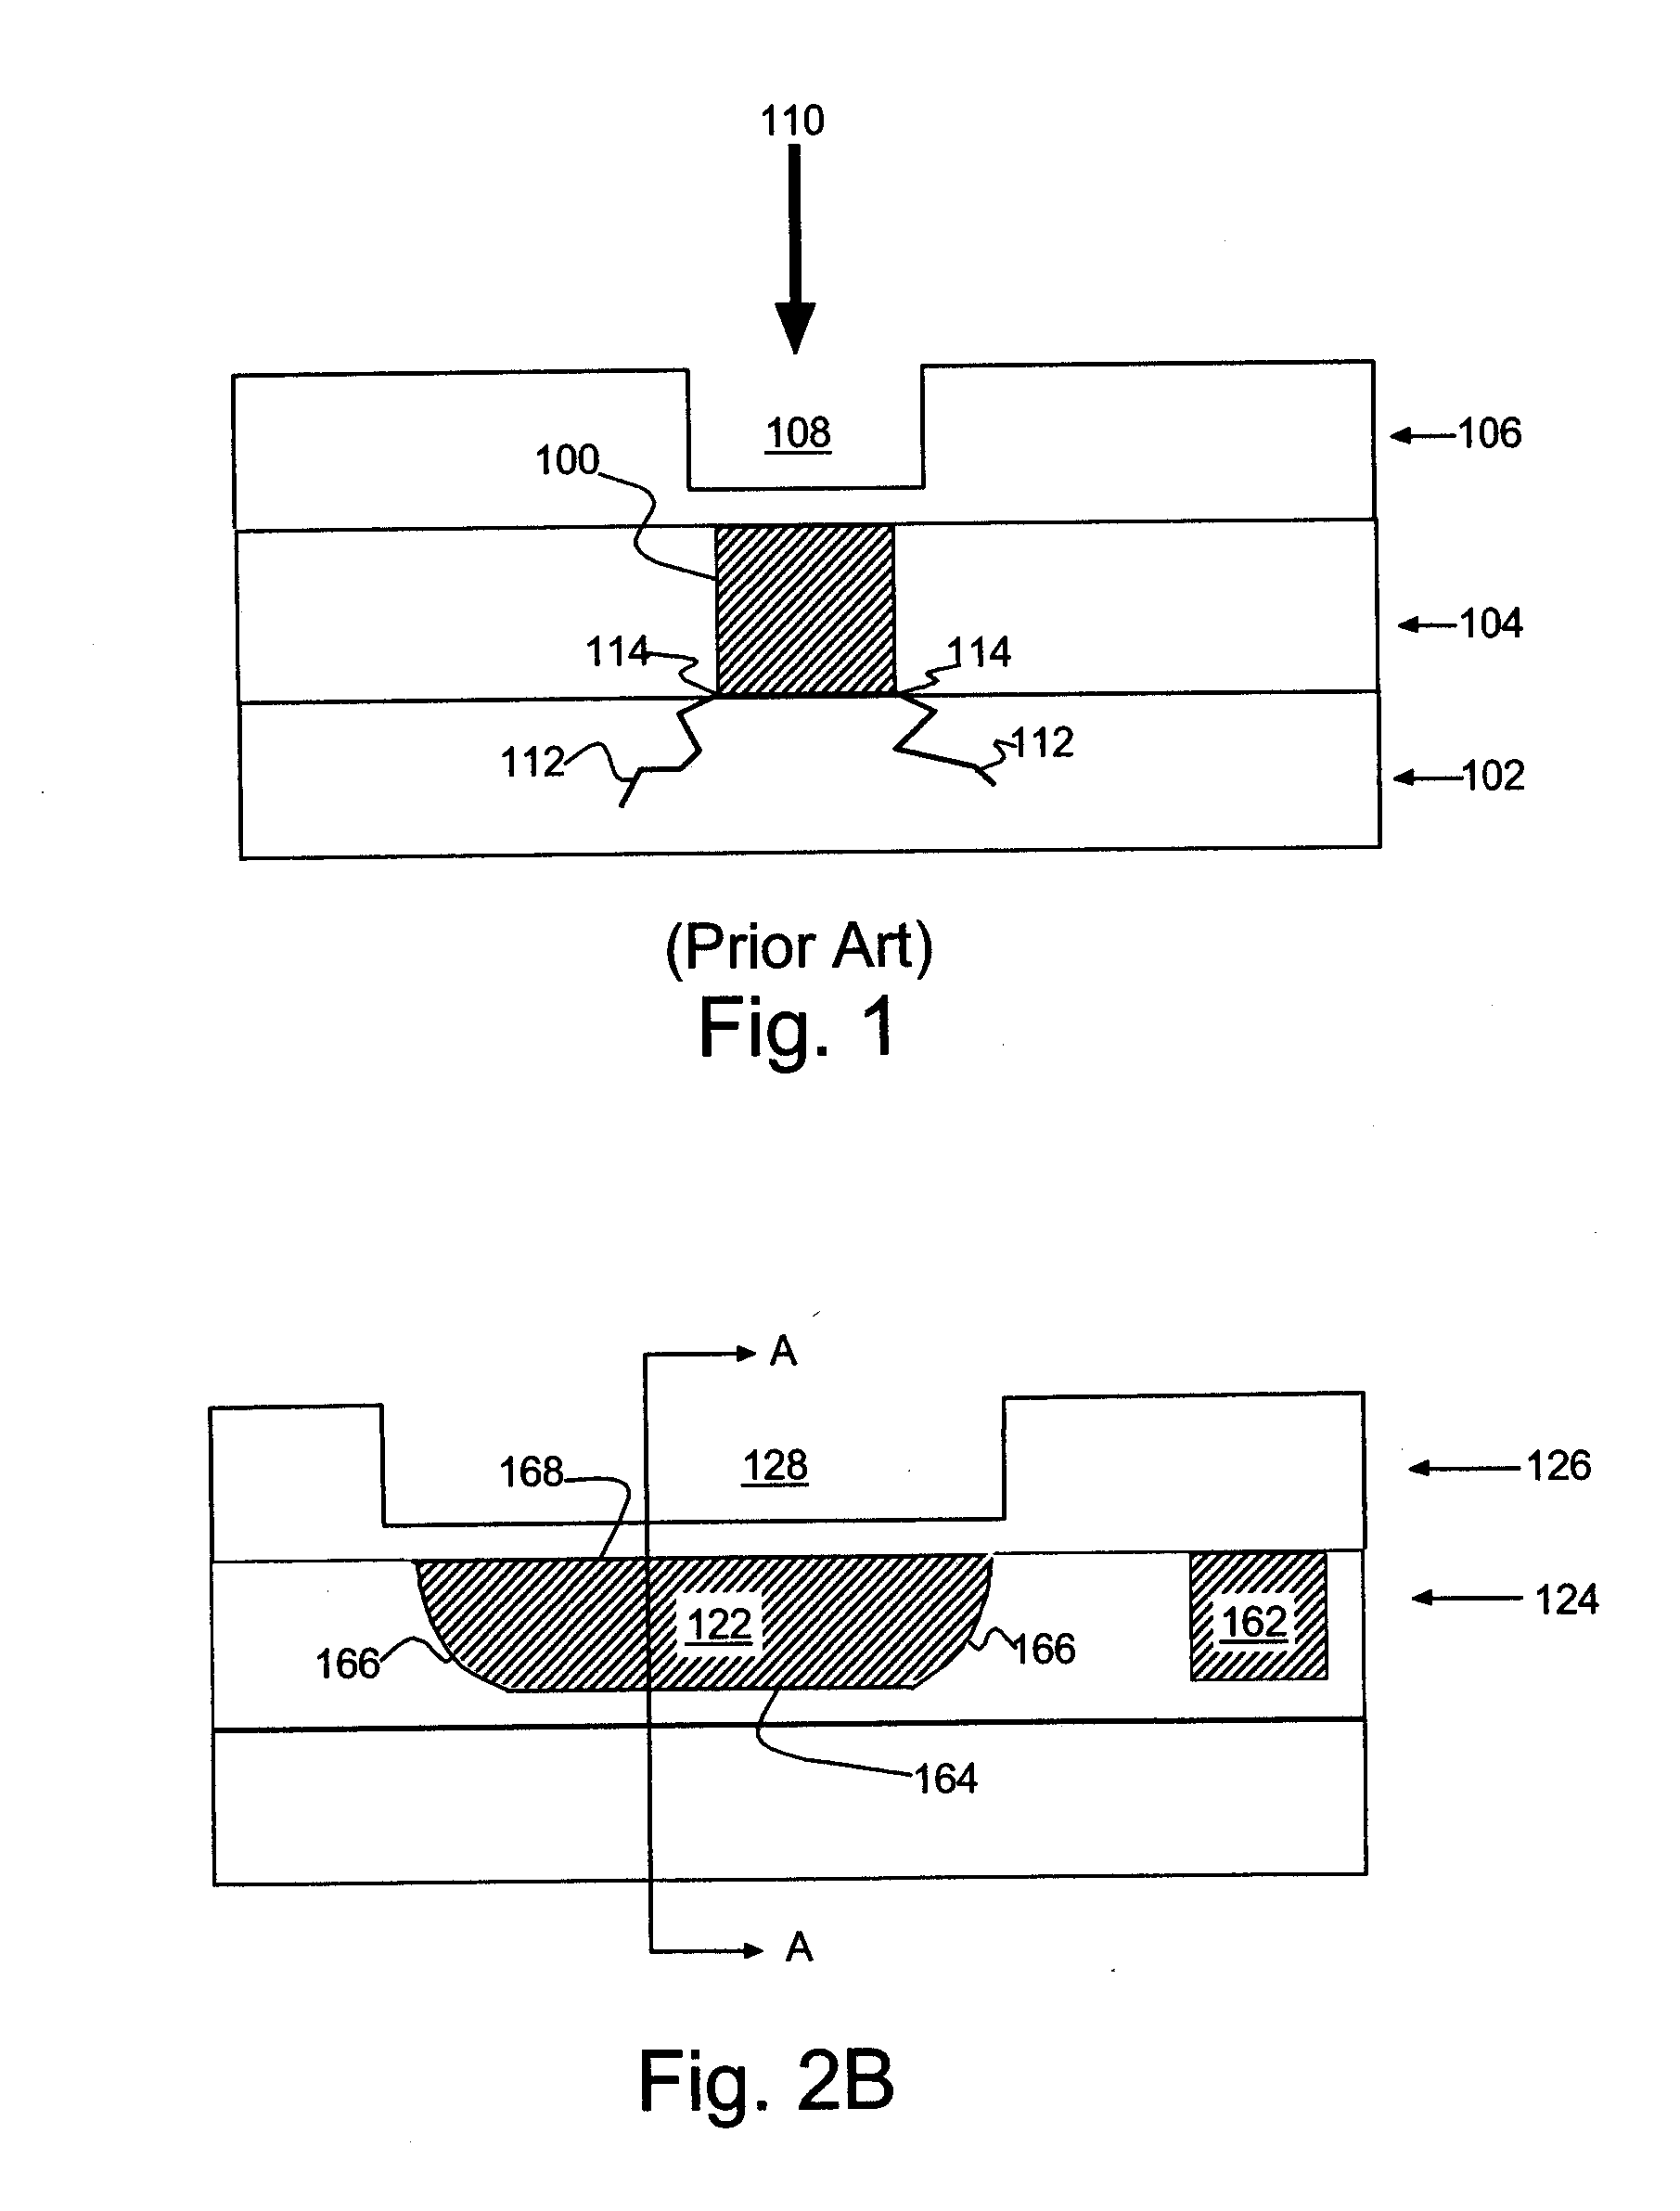 Integrated circuit (IC) with on-chip programmable fuses